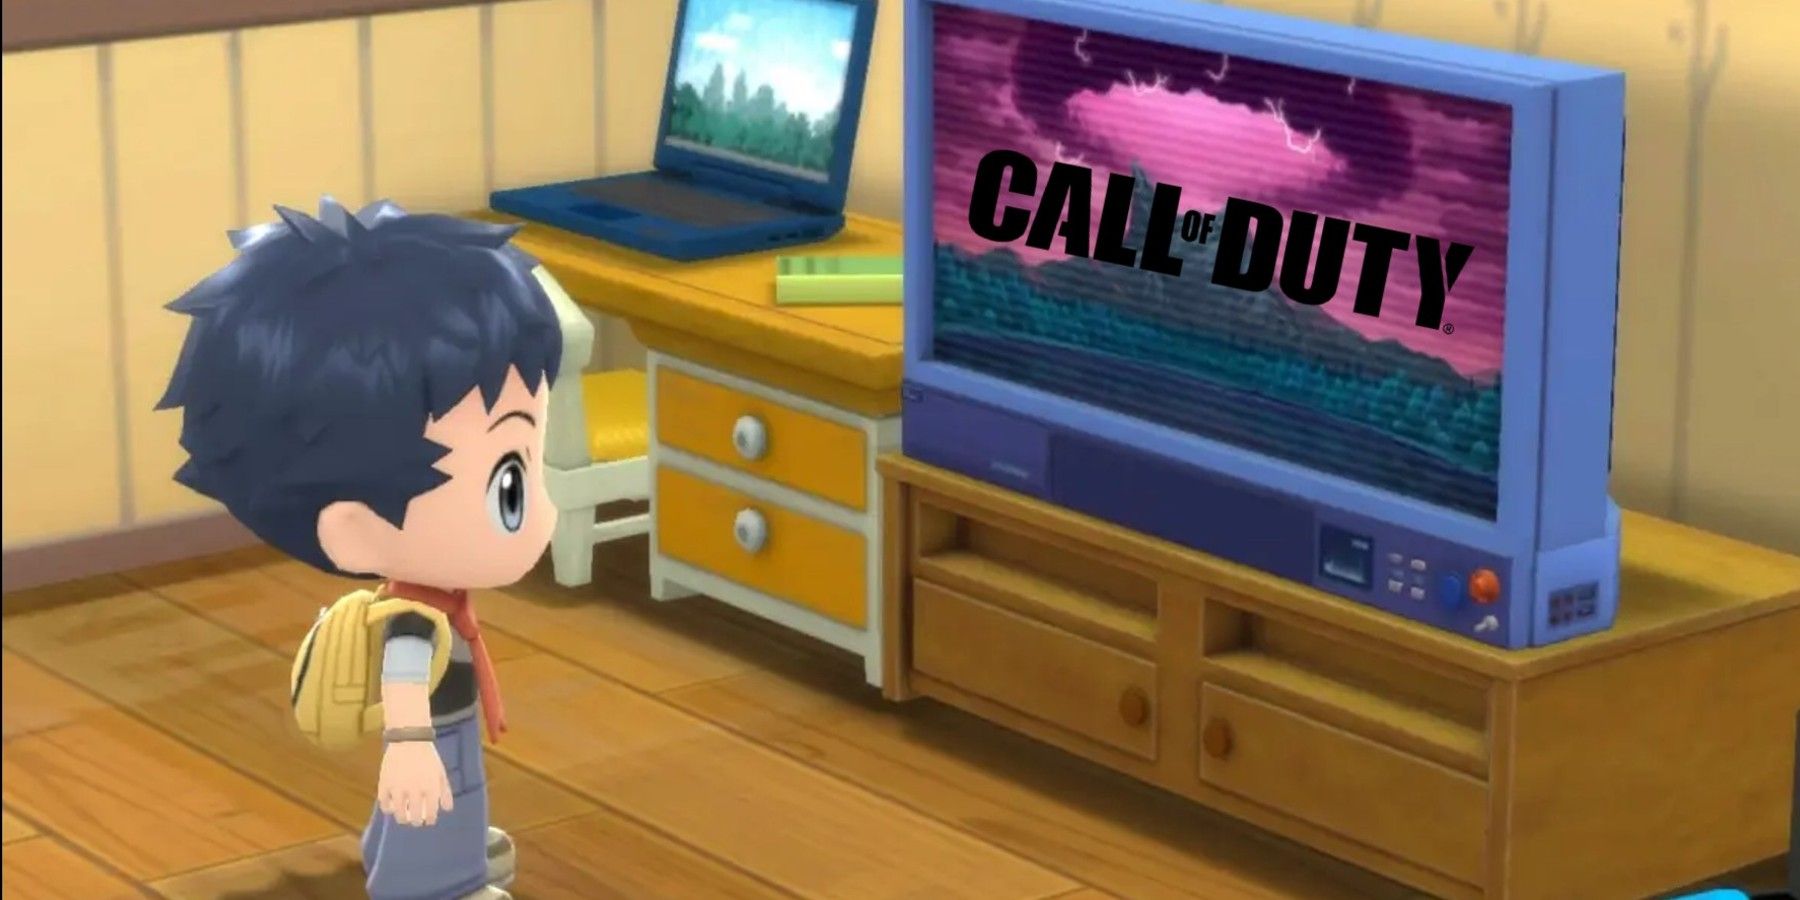 pokemon protagonist looking at tv with call of duty logo